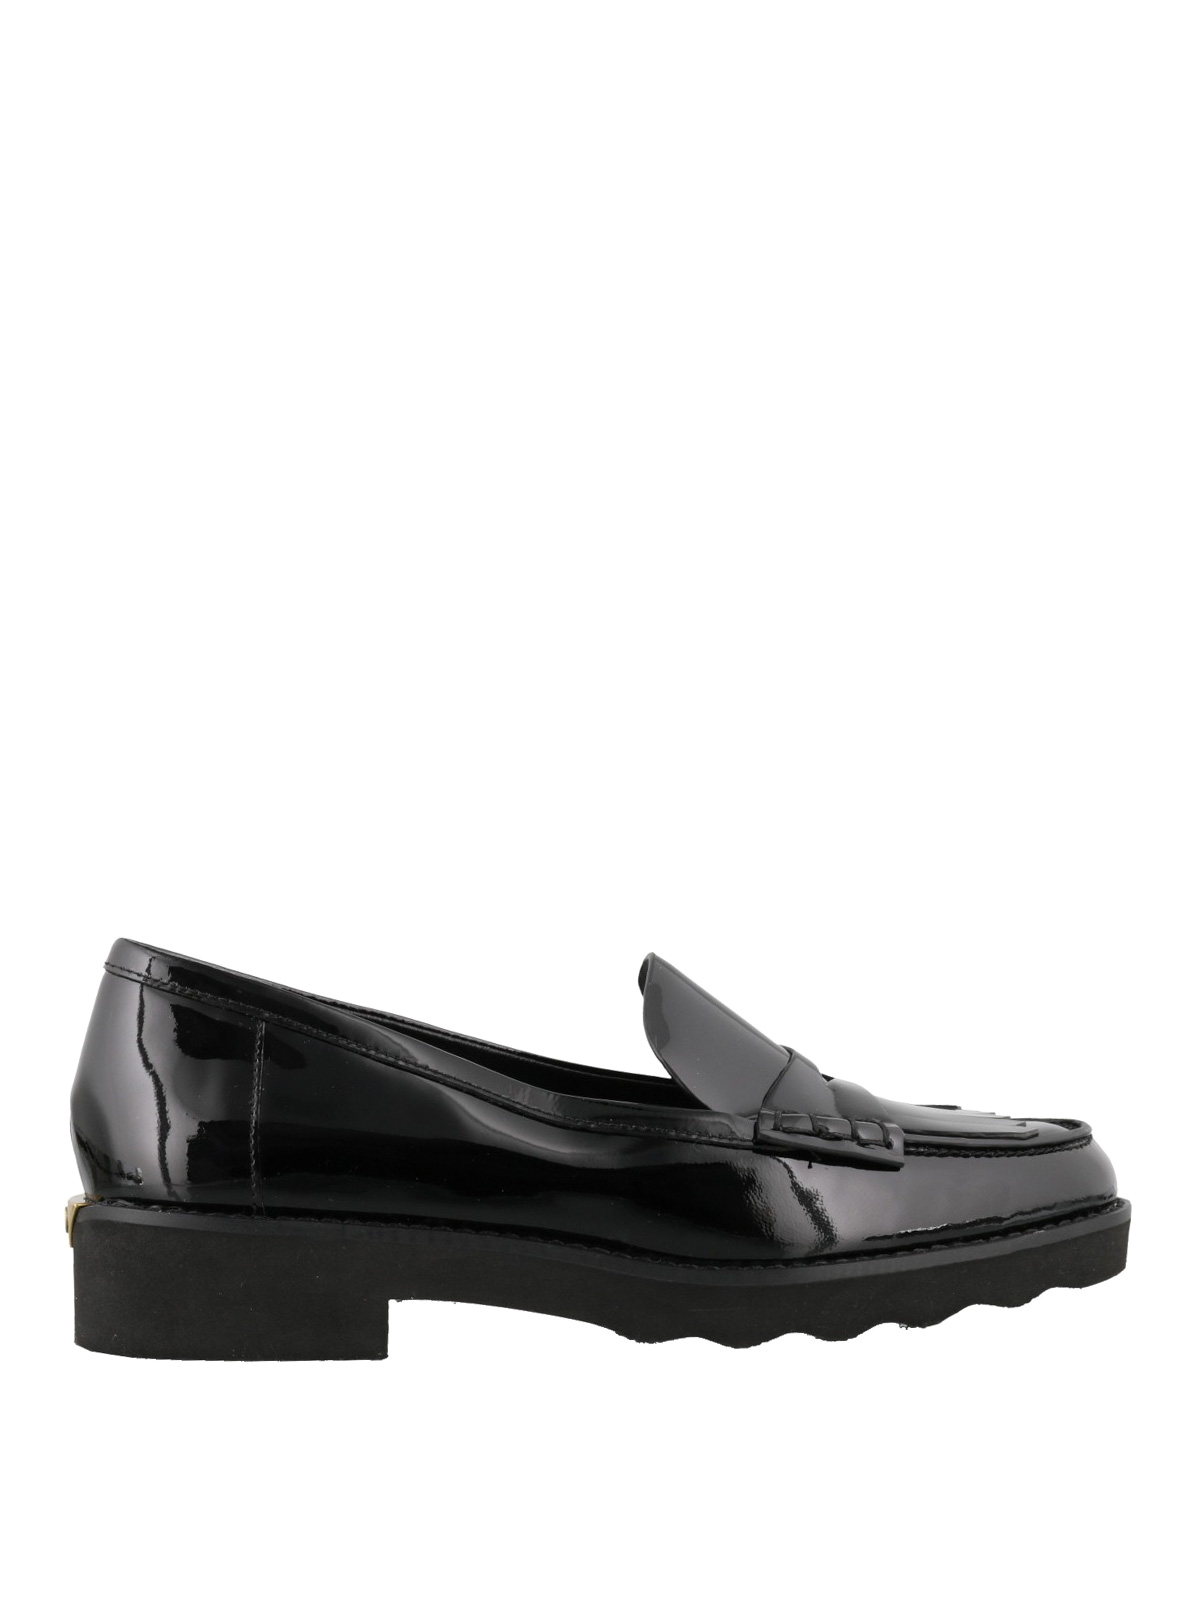 michael kors patent leather loafers